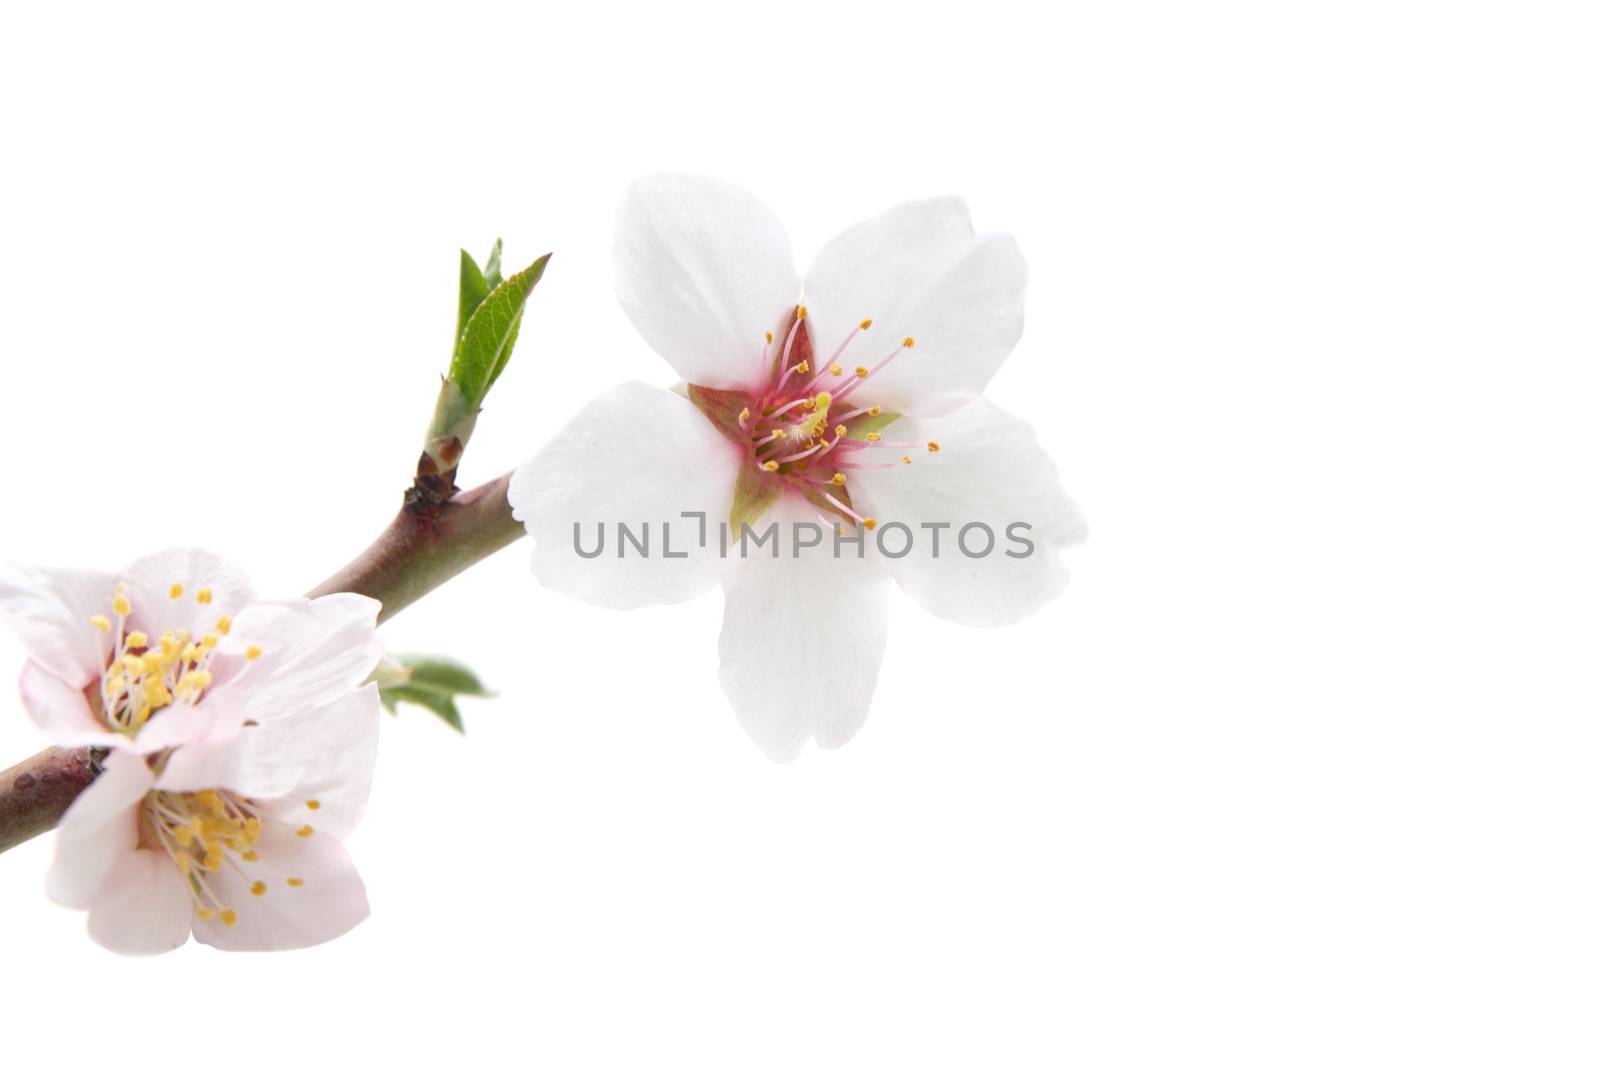 Branch with almond white flowers isolated on white background